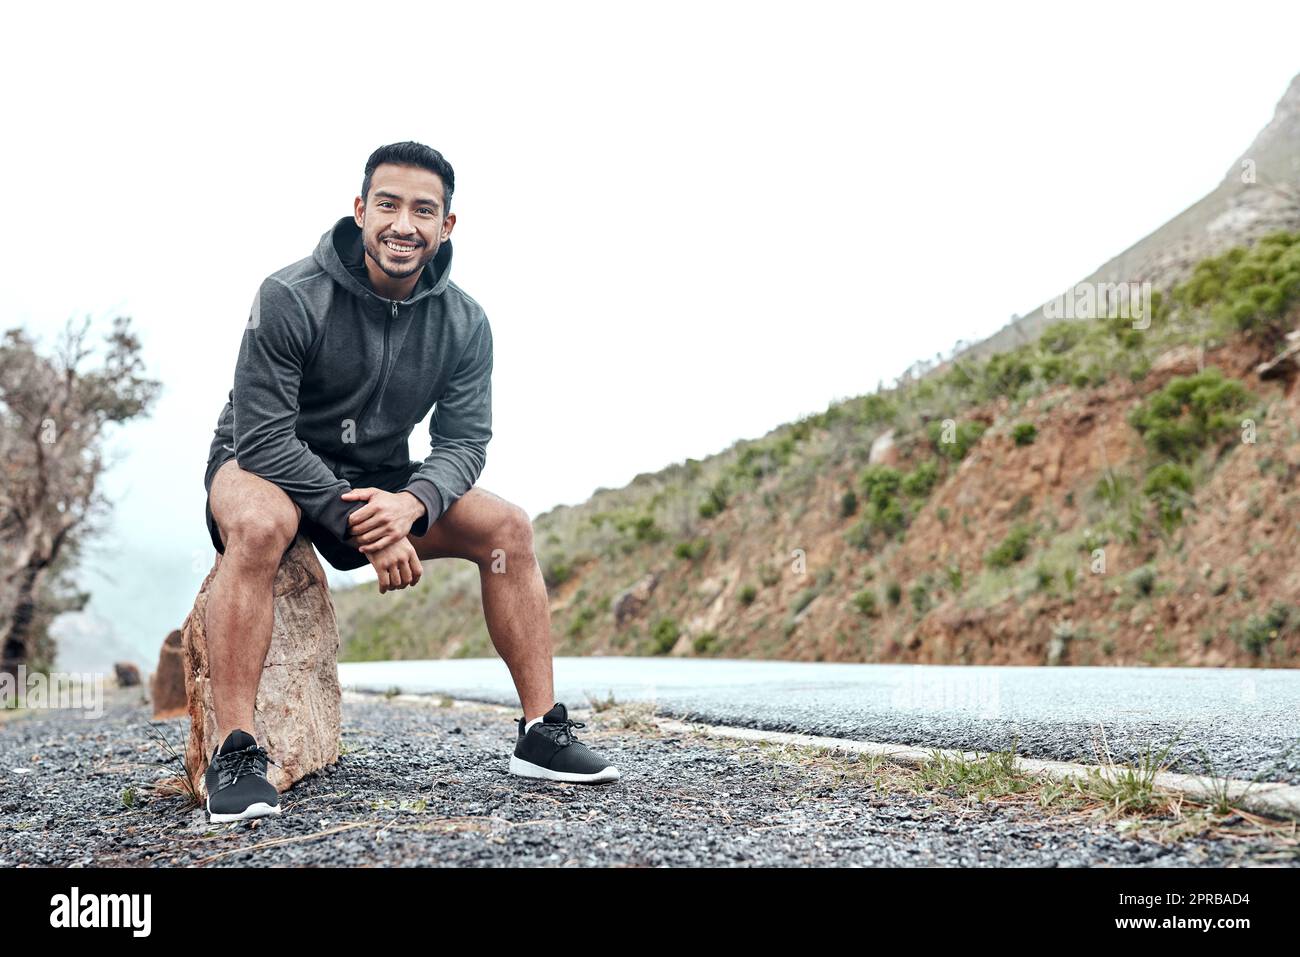 I came out for some solo cardio along the scenic route. Portrait of a sporty young man taking a break while exercising outdoors. Stock Photo